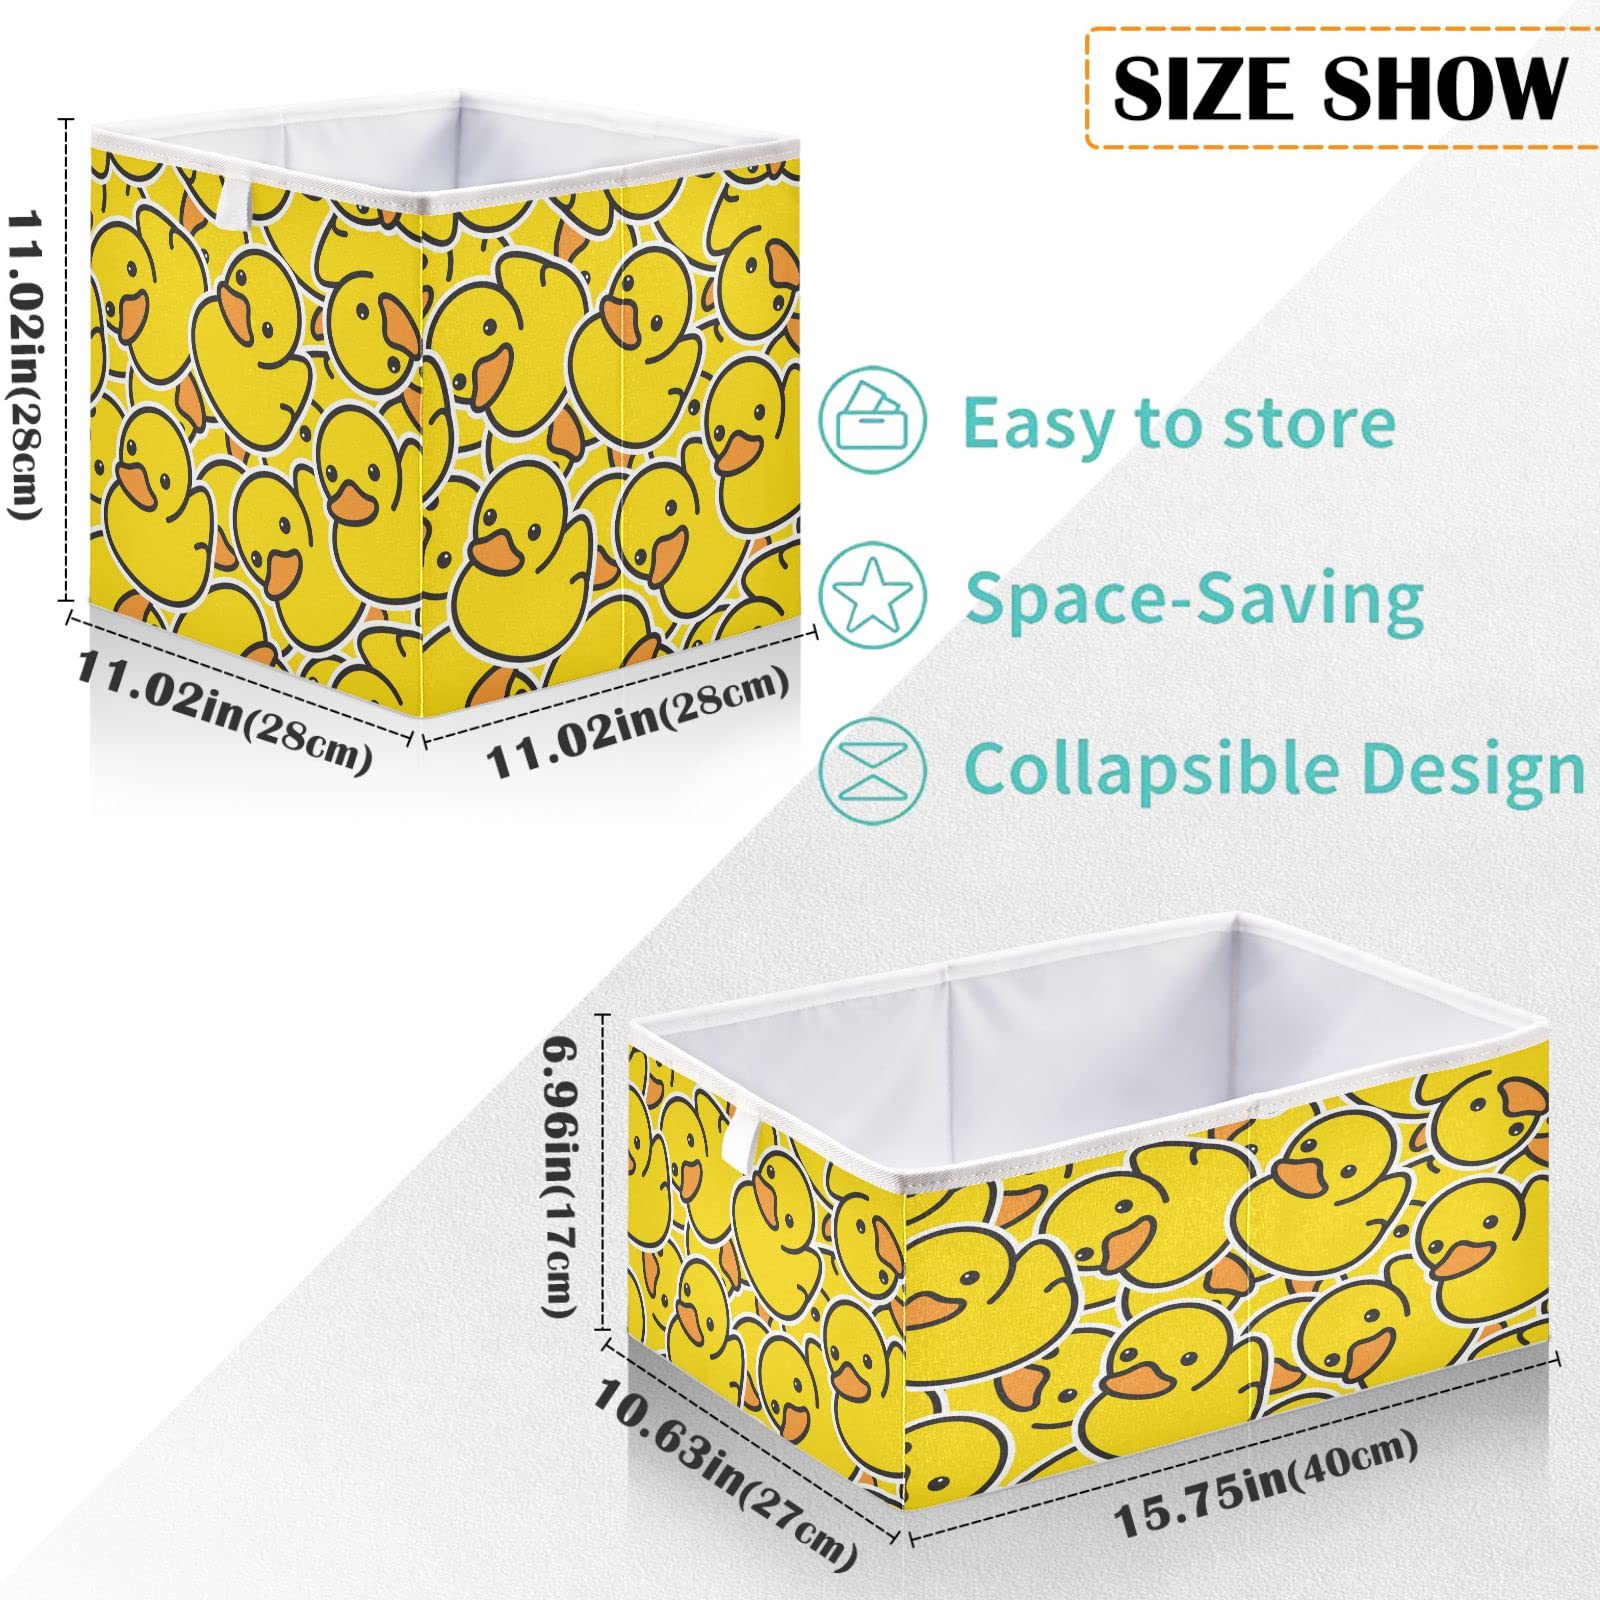 visesunny Closet Baskets Cute Yellow Duck Cartoon Animal Storage Bins Fabric Baskets for Organizing Shelves Foldable Storage Cube Bins for Clothes, Toys, Baby Toiletry, Office Supply